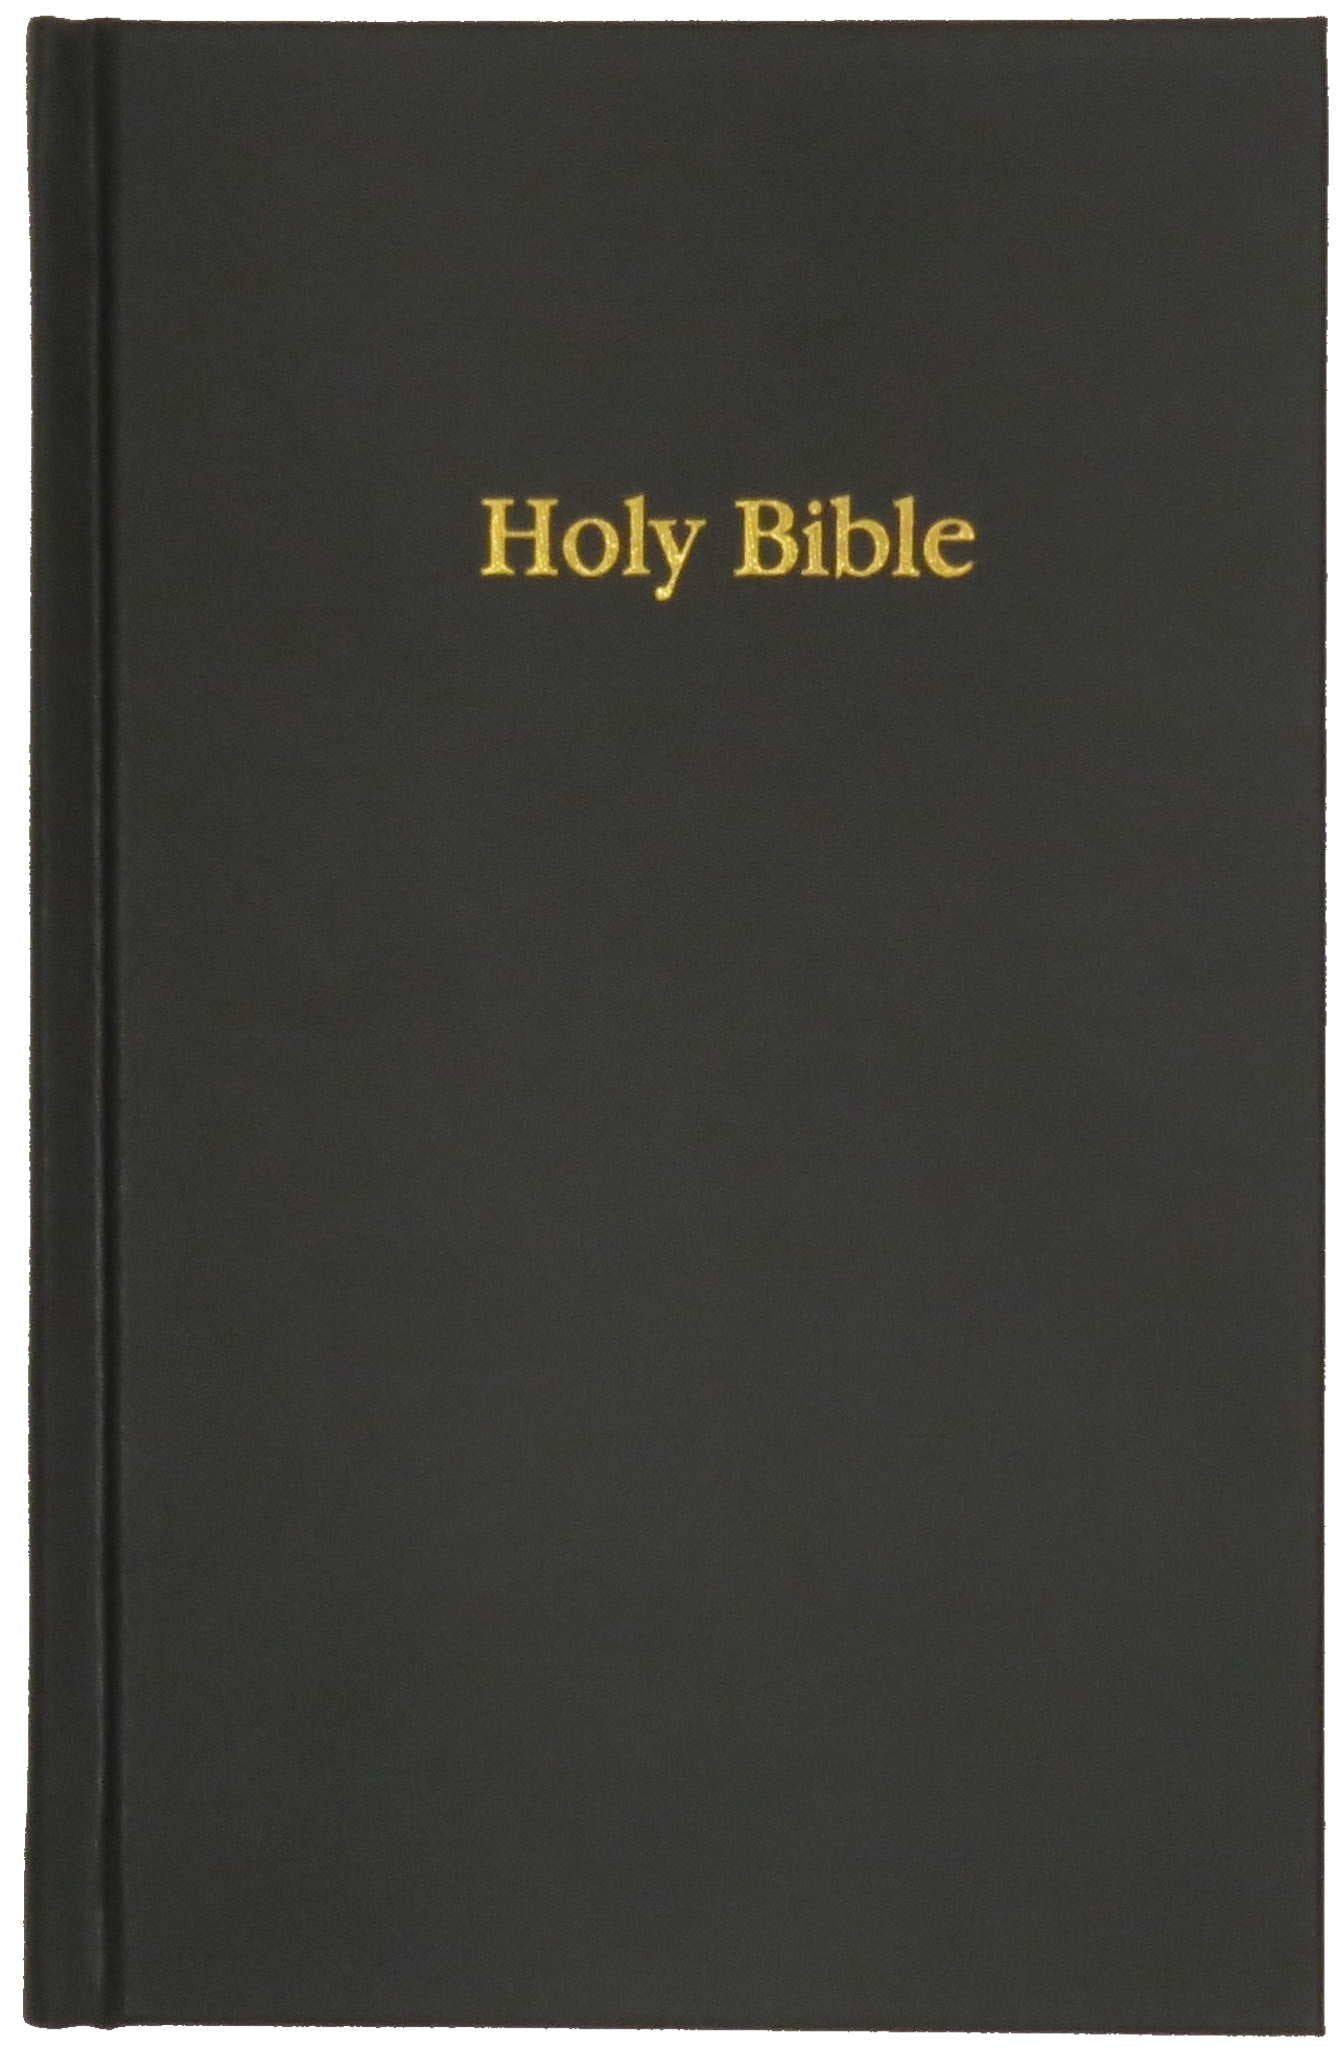 NASB Large Print Pew Bible, 1995 text (Full Case of 20)